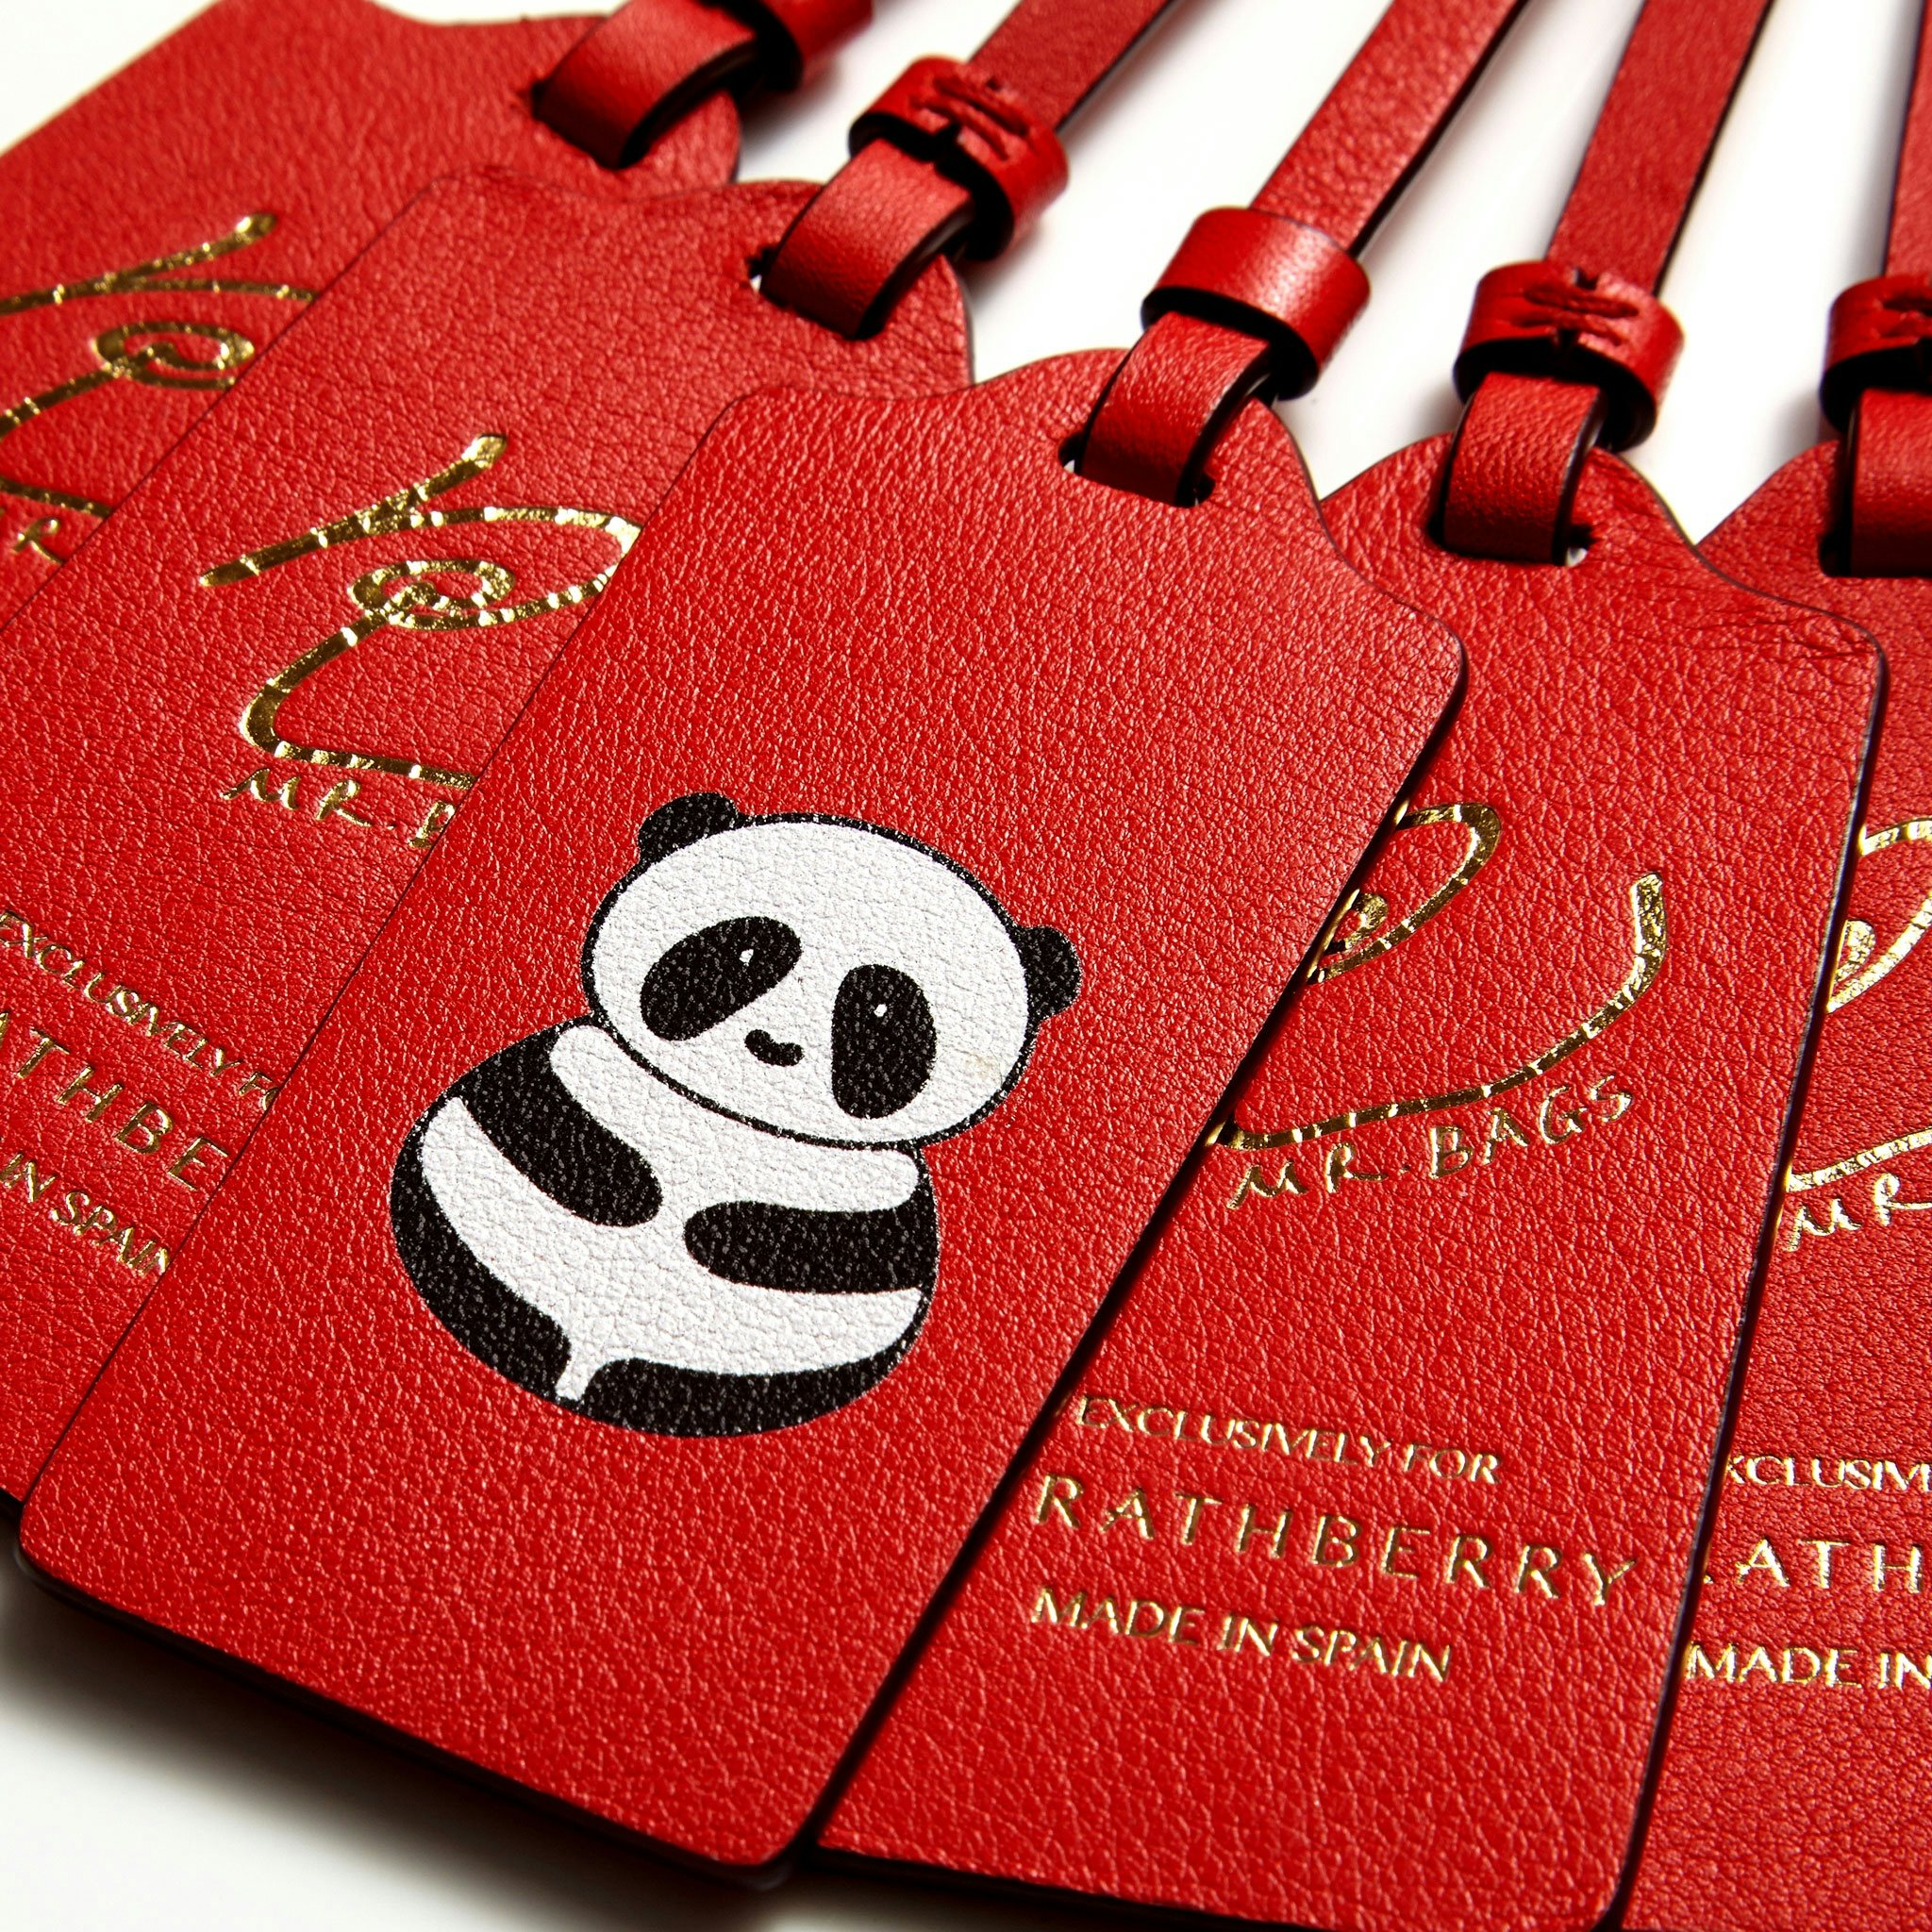 The youthful panda on Strathberry's bag tags is one in a series of illustrations meant to be a playful take on the Year of the Rooster. (Courtesy Photo)